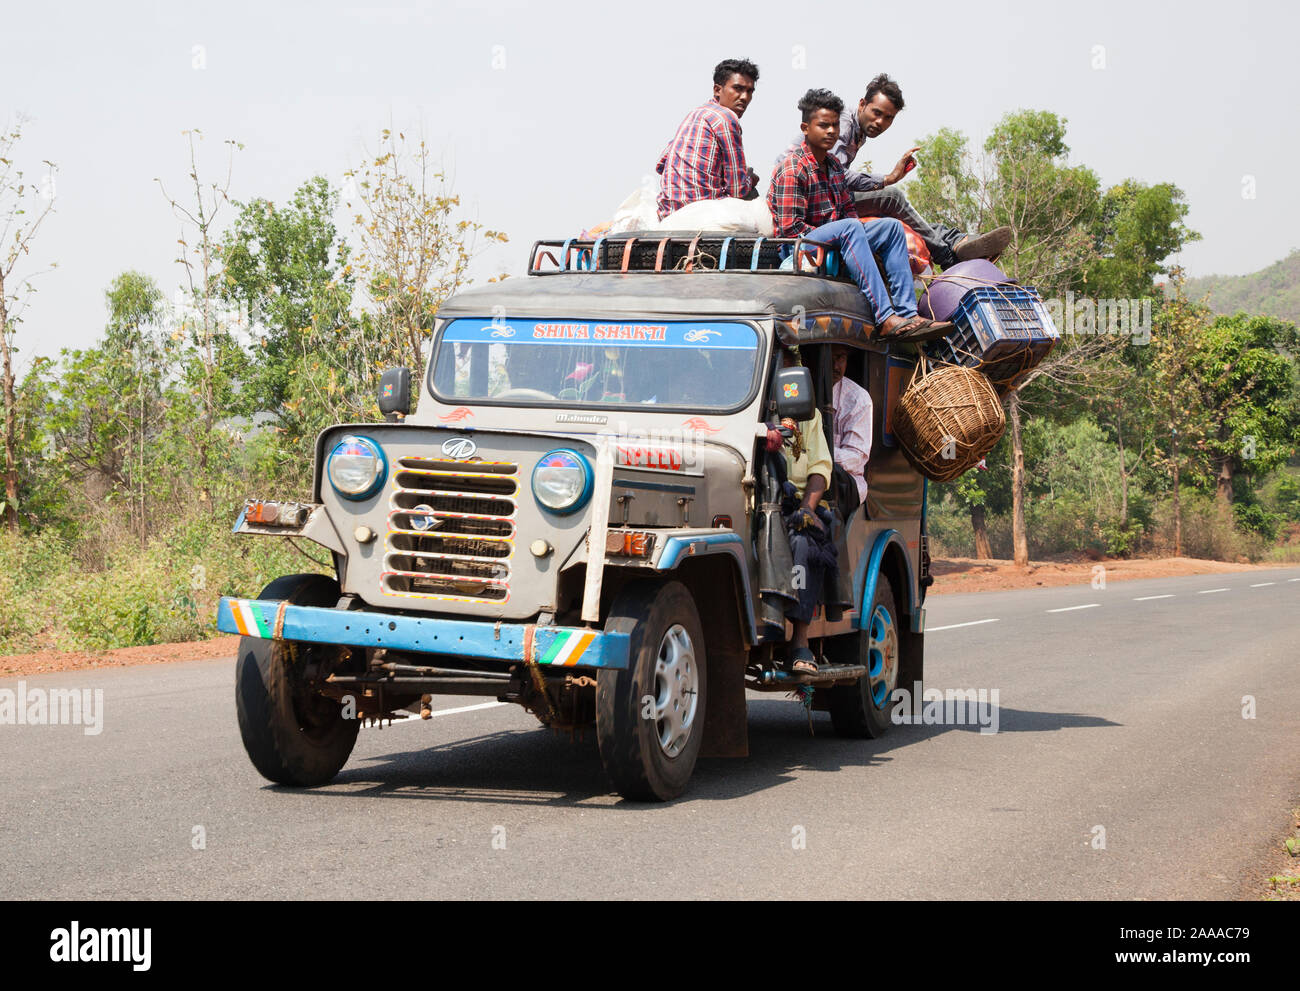 Passengers cling to overloaded Indian Mahindra Jeep taxi travelling along rural Odisha highway Stock Photo